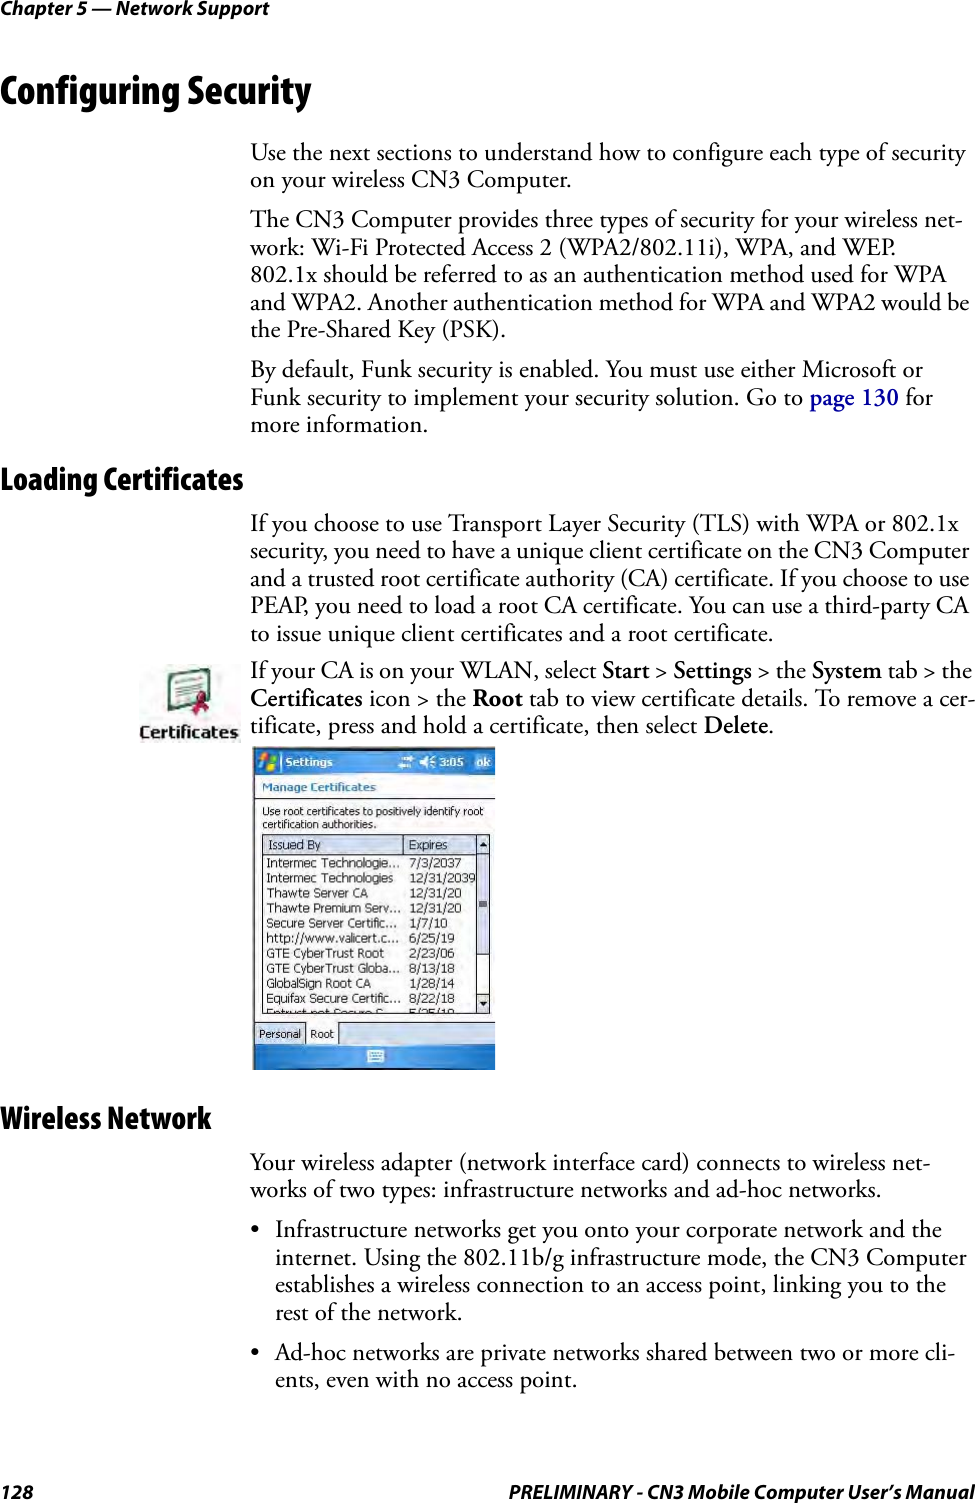 Chapter 5 — Network Support128 PRELIMINARY - CN3 Mobile Computer User’s ManualConfiguring SecurityUse the next sections to understand how to configure each type of security on your wireless CN3 Computer.The CN3 Computer provides three types of security for your wireless net-work: Wi-Fi Protected Access 2 (WPA2/802.11i), WPA, and WEP.   802.1x should be referred to as an authentication method used for WPA and WPA2. Another authentication method for WPA and WPA2 would be the Pre-Shared Key (PSK).By default, Funk security is enabled. You must use either Microsoft or Funk security to implement your security solution. Go to page 130 for more information.Loading CertificatesIf you choose to use Transport Layer Security (TLS) with WPA or 802.1x security, you need to have a unique client certificate on the CN3 Computer and a trusted root certificate authority (CA) certificate. If you choose to use PEAP, you need to load a root CA certificate. You can use a third-party CA to issue unique client certificates and a root certificate.Wireless NetworkYour wireless adapter (network interface card) connects to wireless net-works of two types: infrastructure networks and ad-hoc networks.• Infrastructure networks get you onto your corporate network and the internet. Using the 802.11b/g infrastructure mode, the CN3 Computer establishes a wireless connection to an access point, linking you to the rest of the network.• Ad-hoc networks are private networks shared between two or more cli-ents, even with no access point.If your CA is on your WLAN, select Start &gt; Settings &gt; the System tab &gt; the Certificates icon &gt; the Root tab to view certificate details. To remove a cer-tificate, press and hold a certificate, then select Delete.